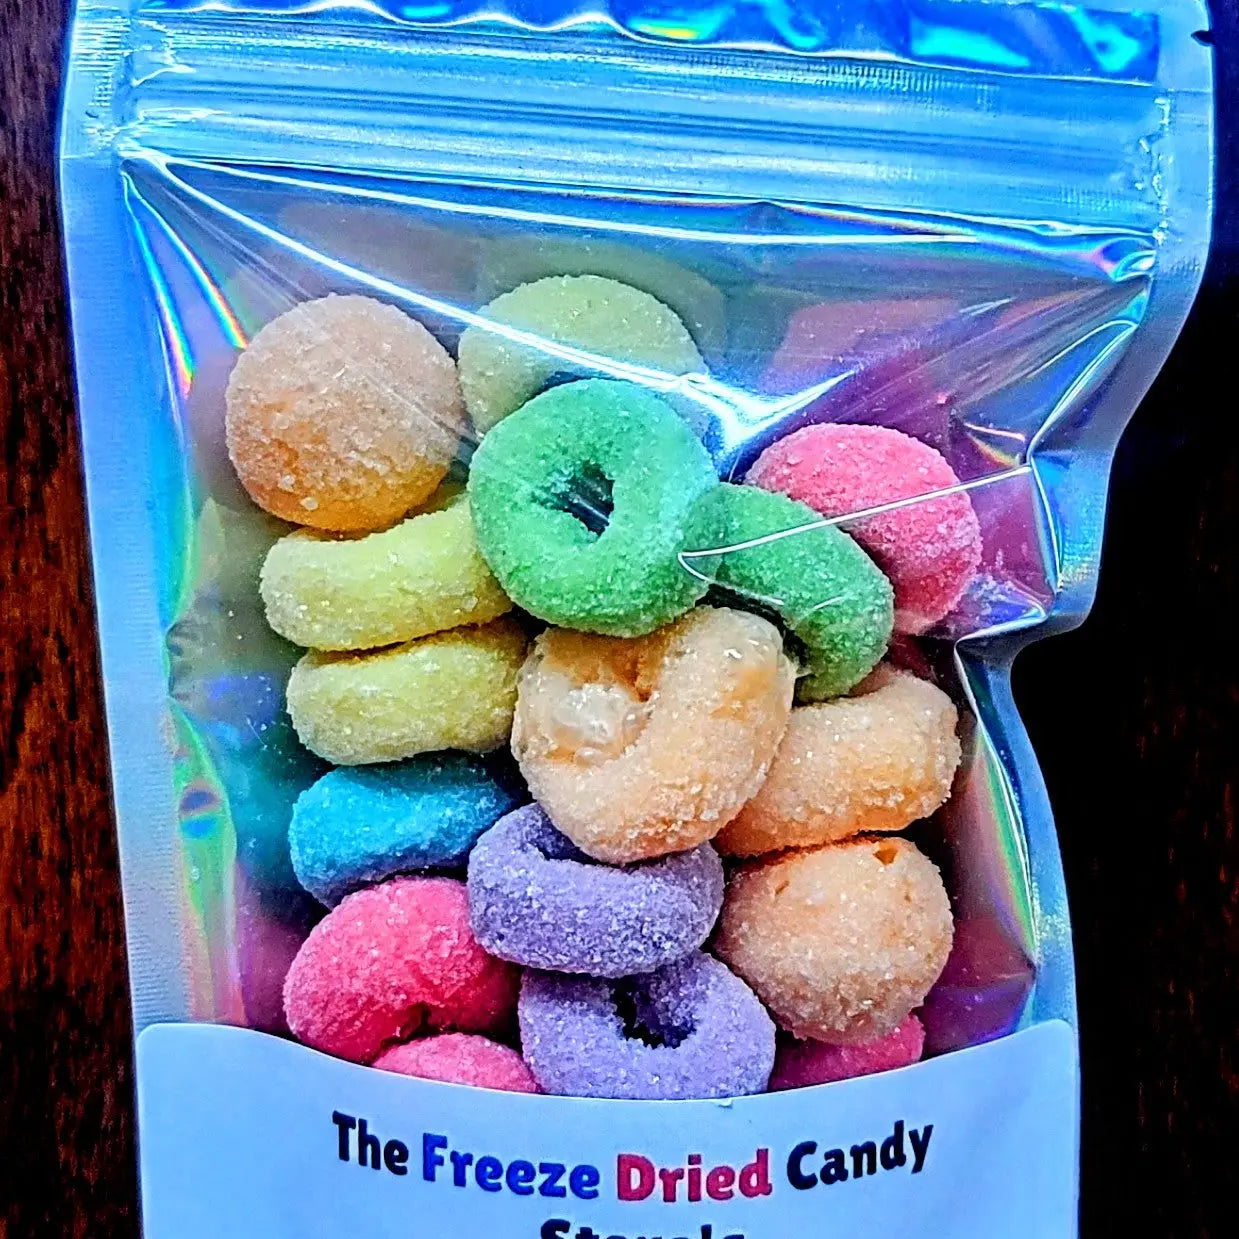 Fruity Cereal Puffs by The Freeze Dried Candy Store